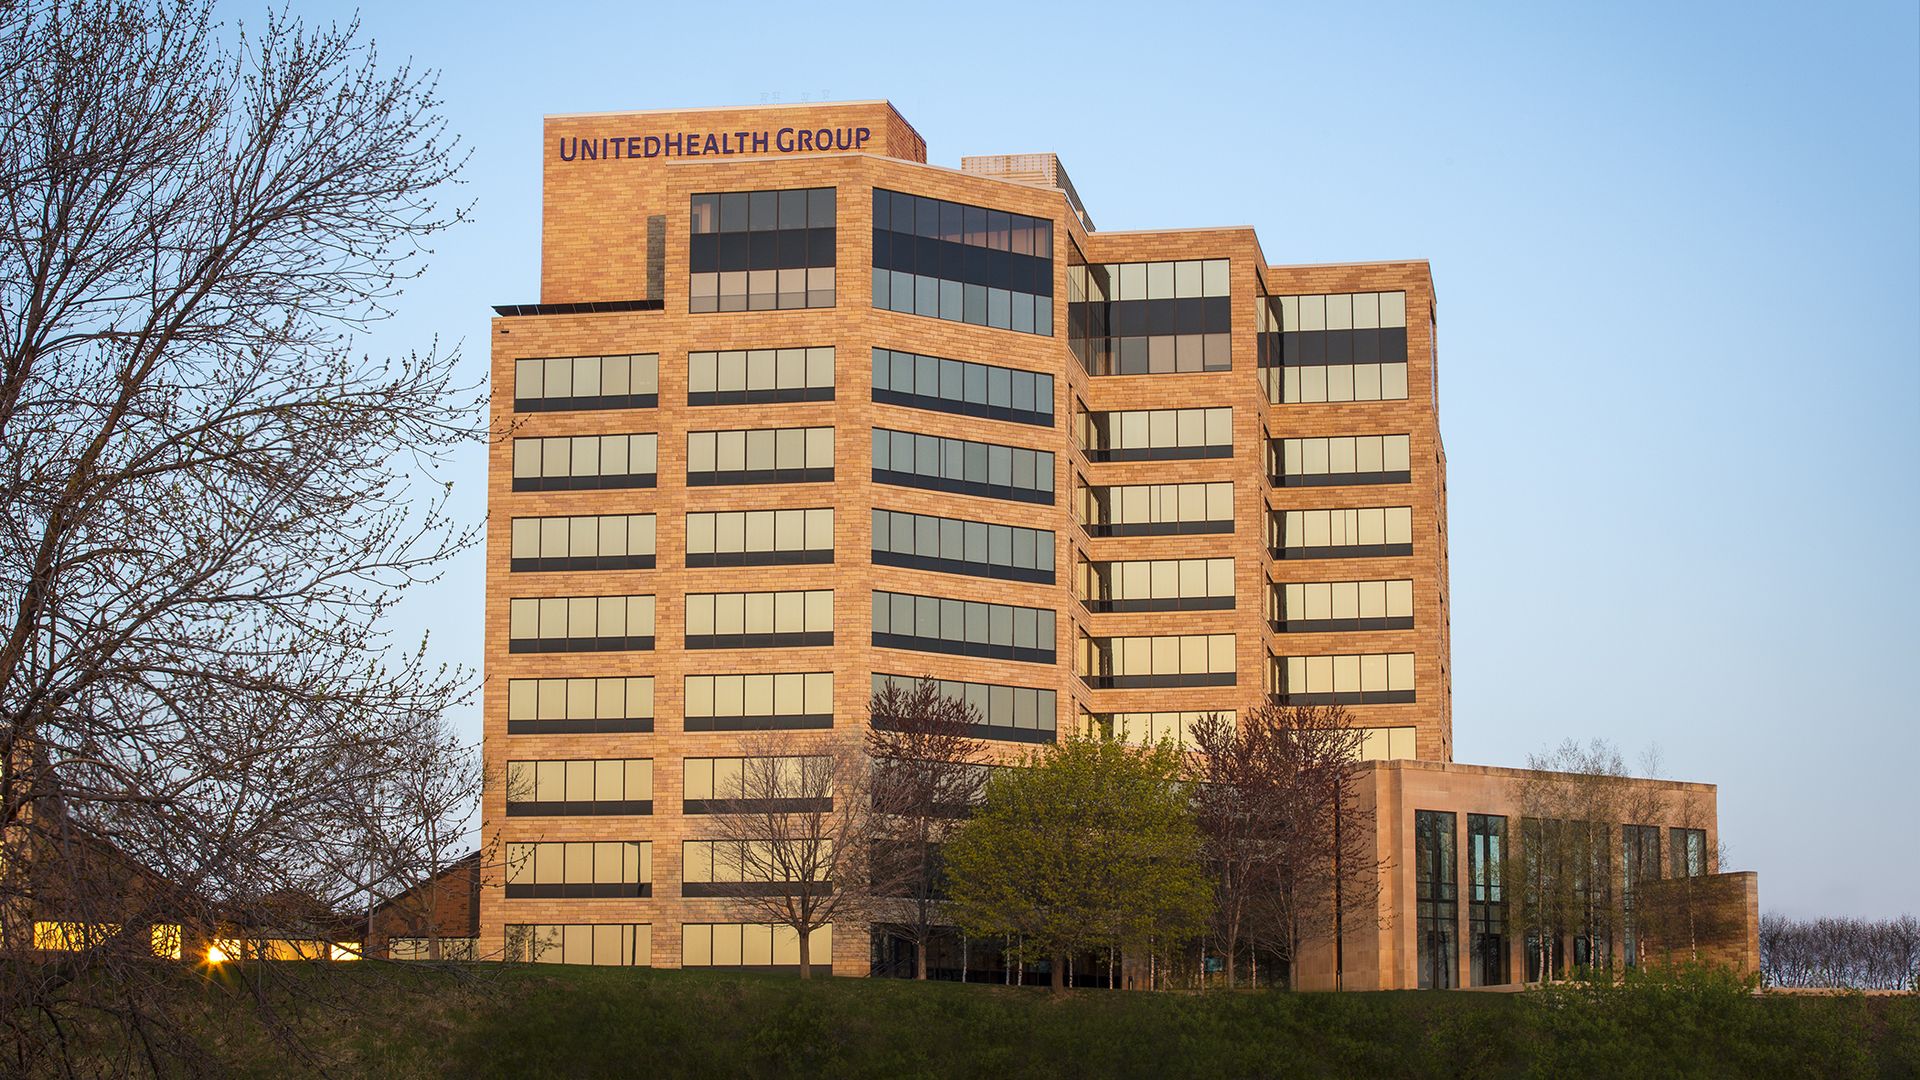 The brown headquarters building of UnitedHealth Group.